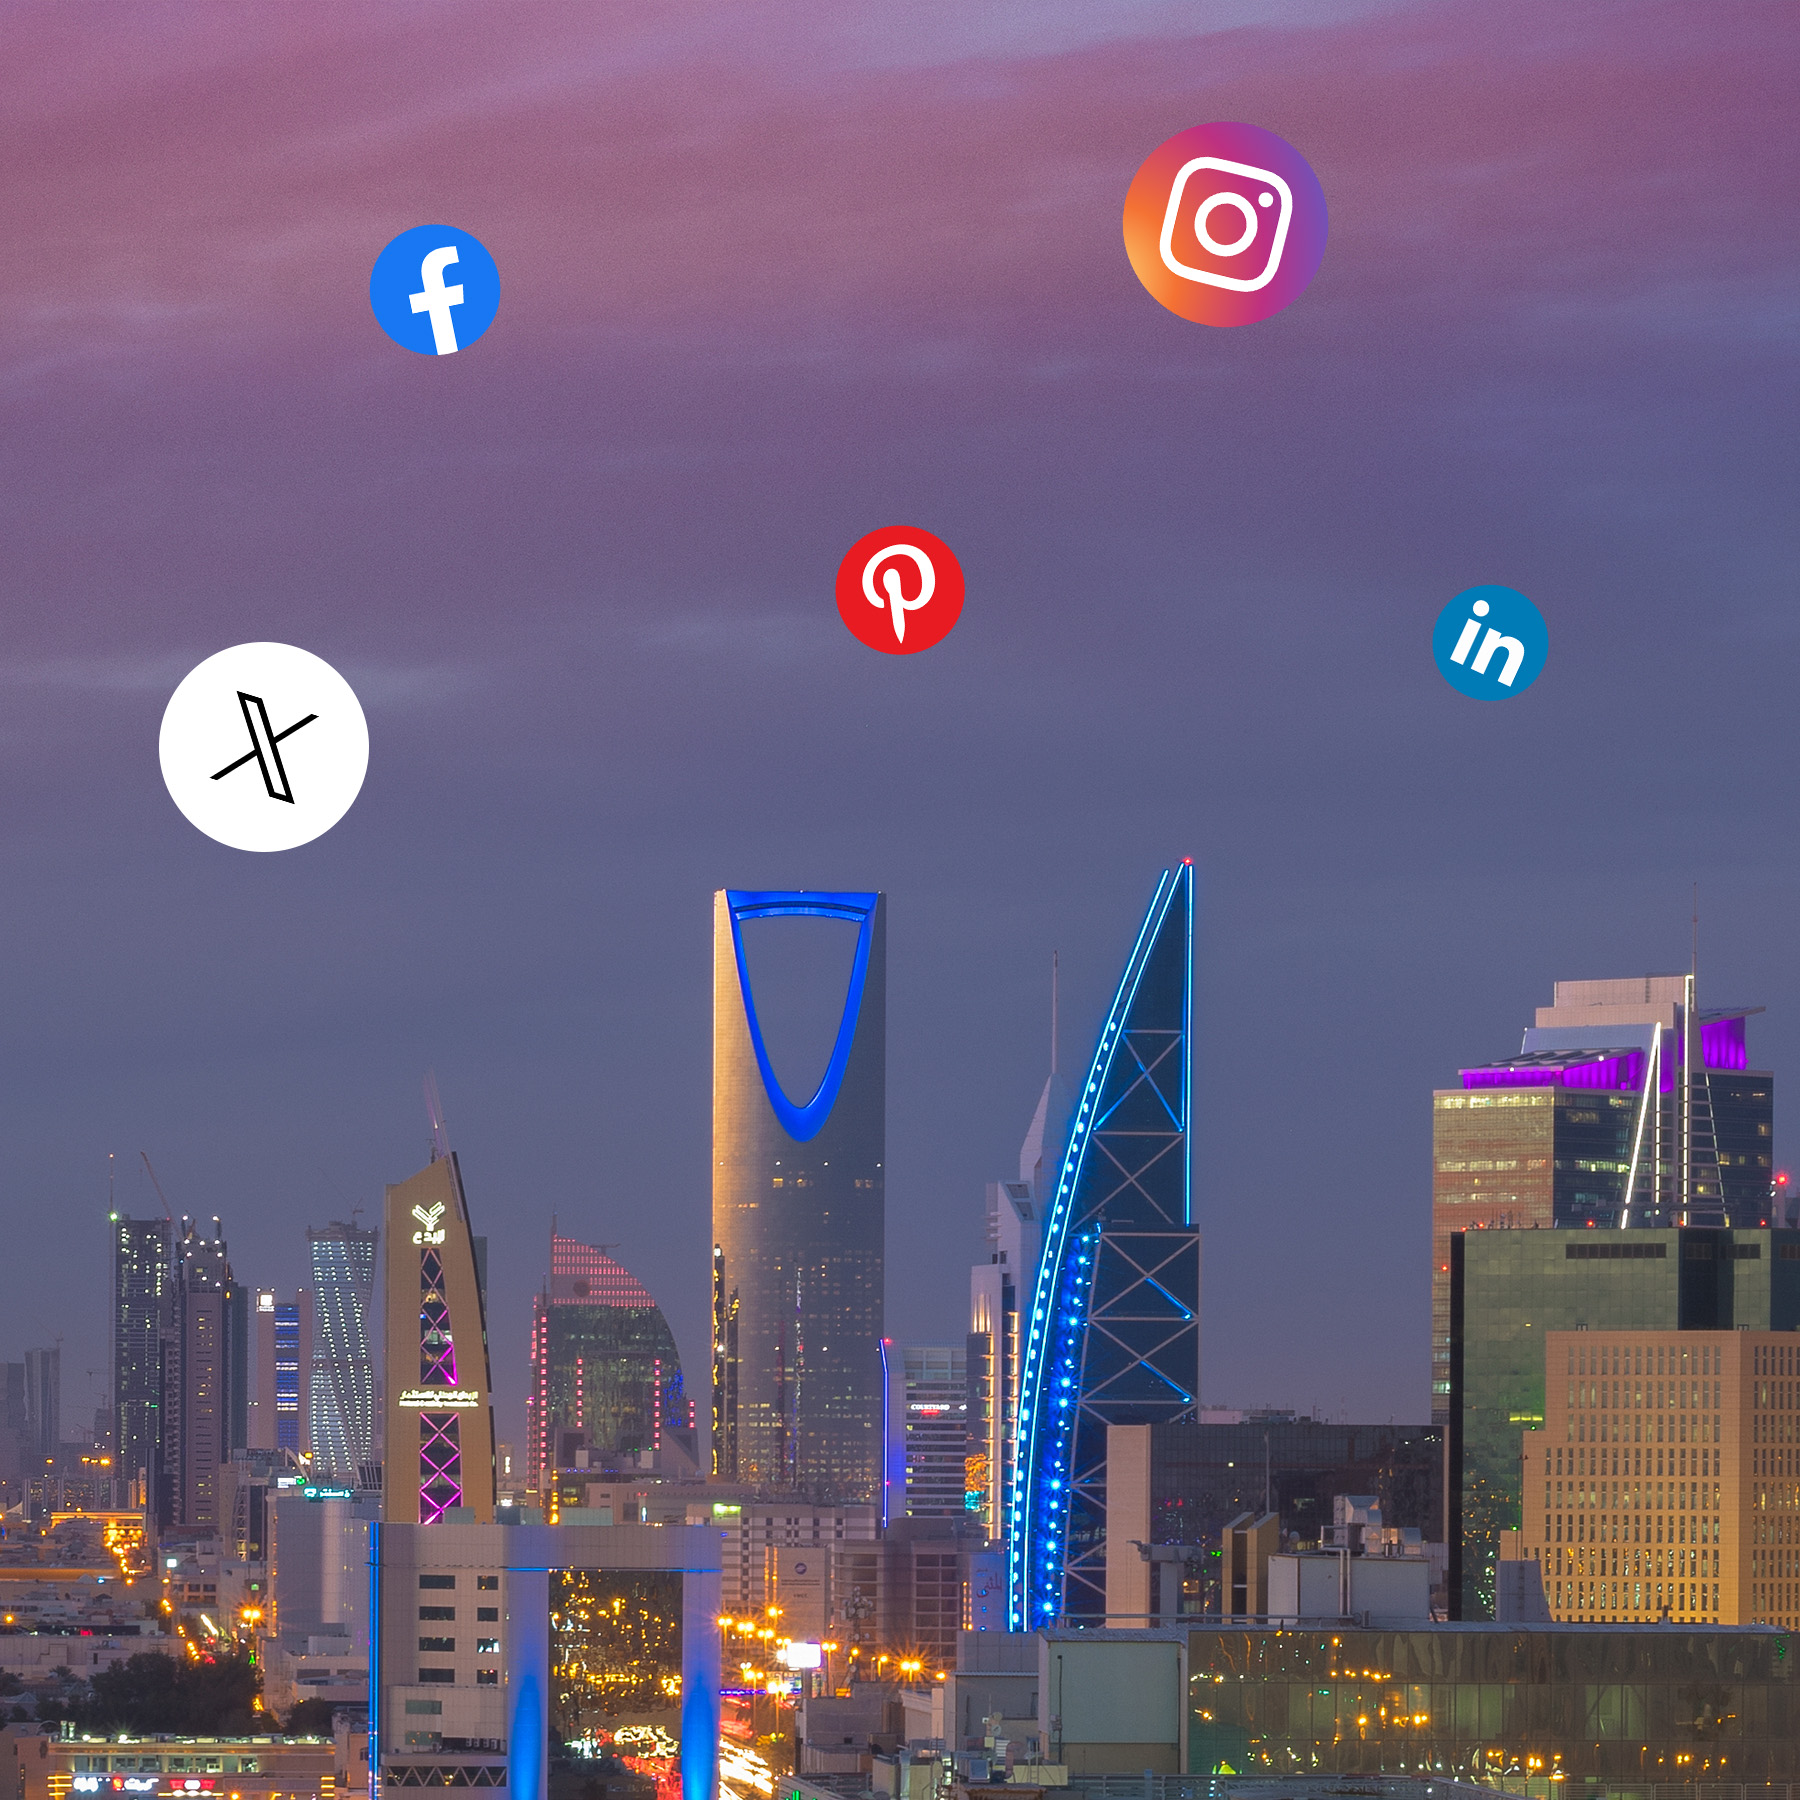 Why-Choose-Us-as-Your-Social-Media-Management-Agency-social-media-management-in-saudi-arabia-webvizion